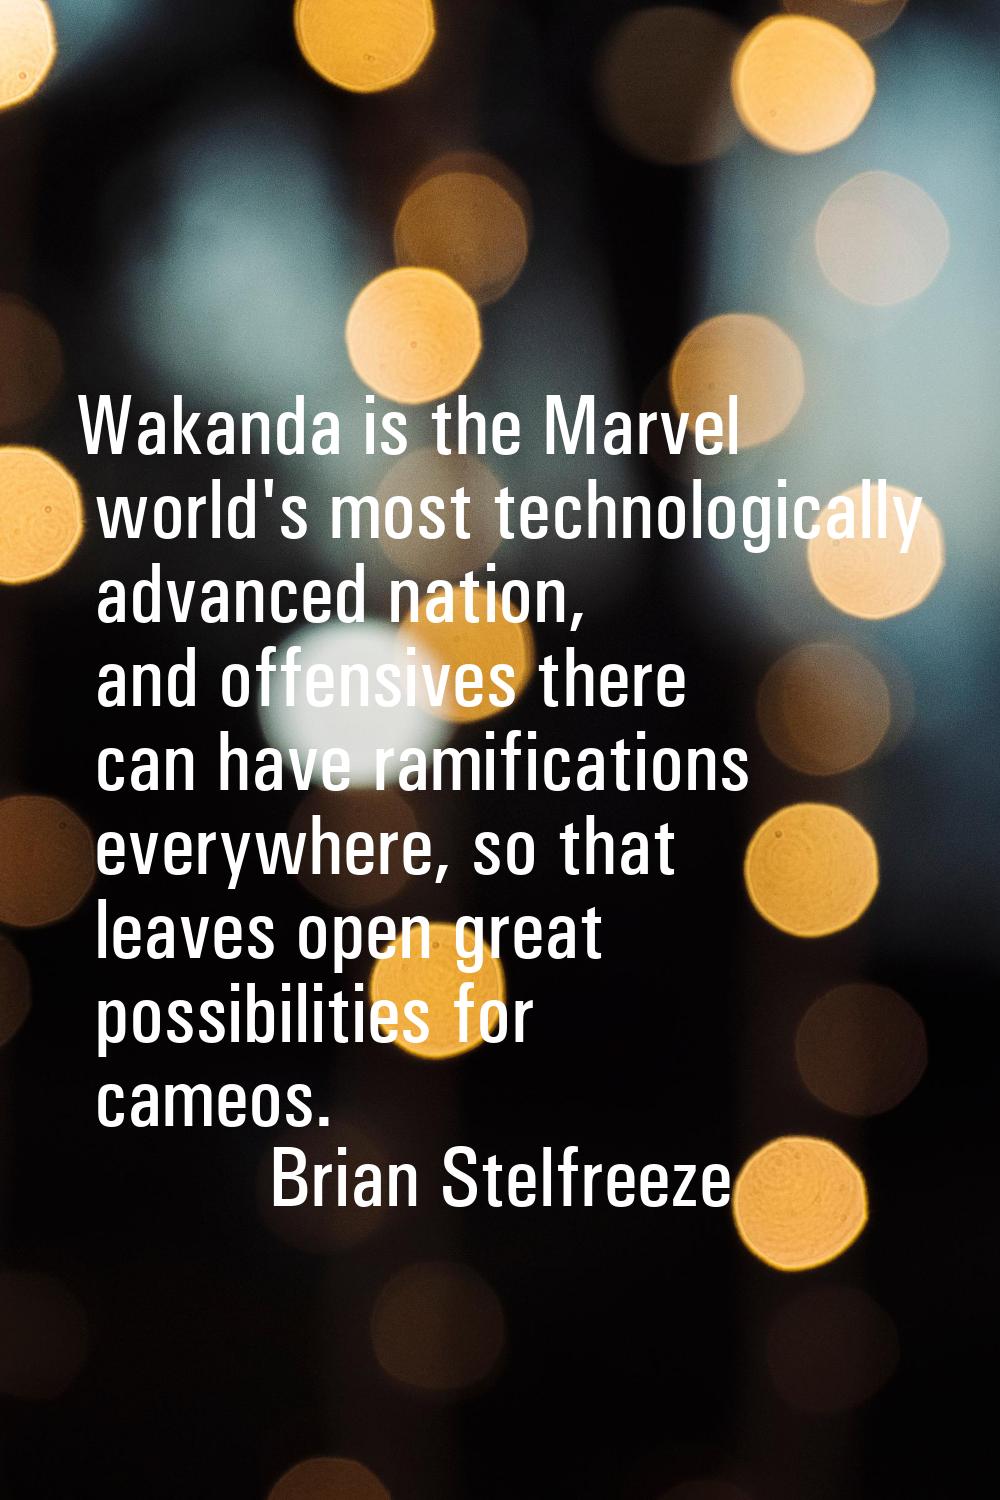 Wakanda is the Marvel world's most technologically advanced nation, and offensives there can have r